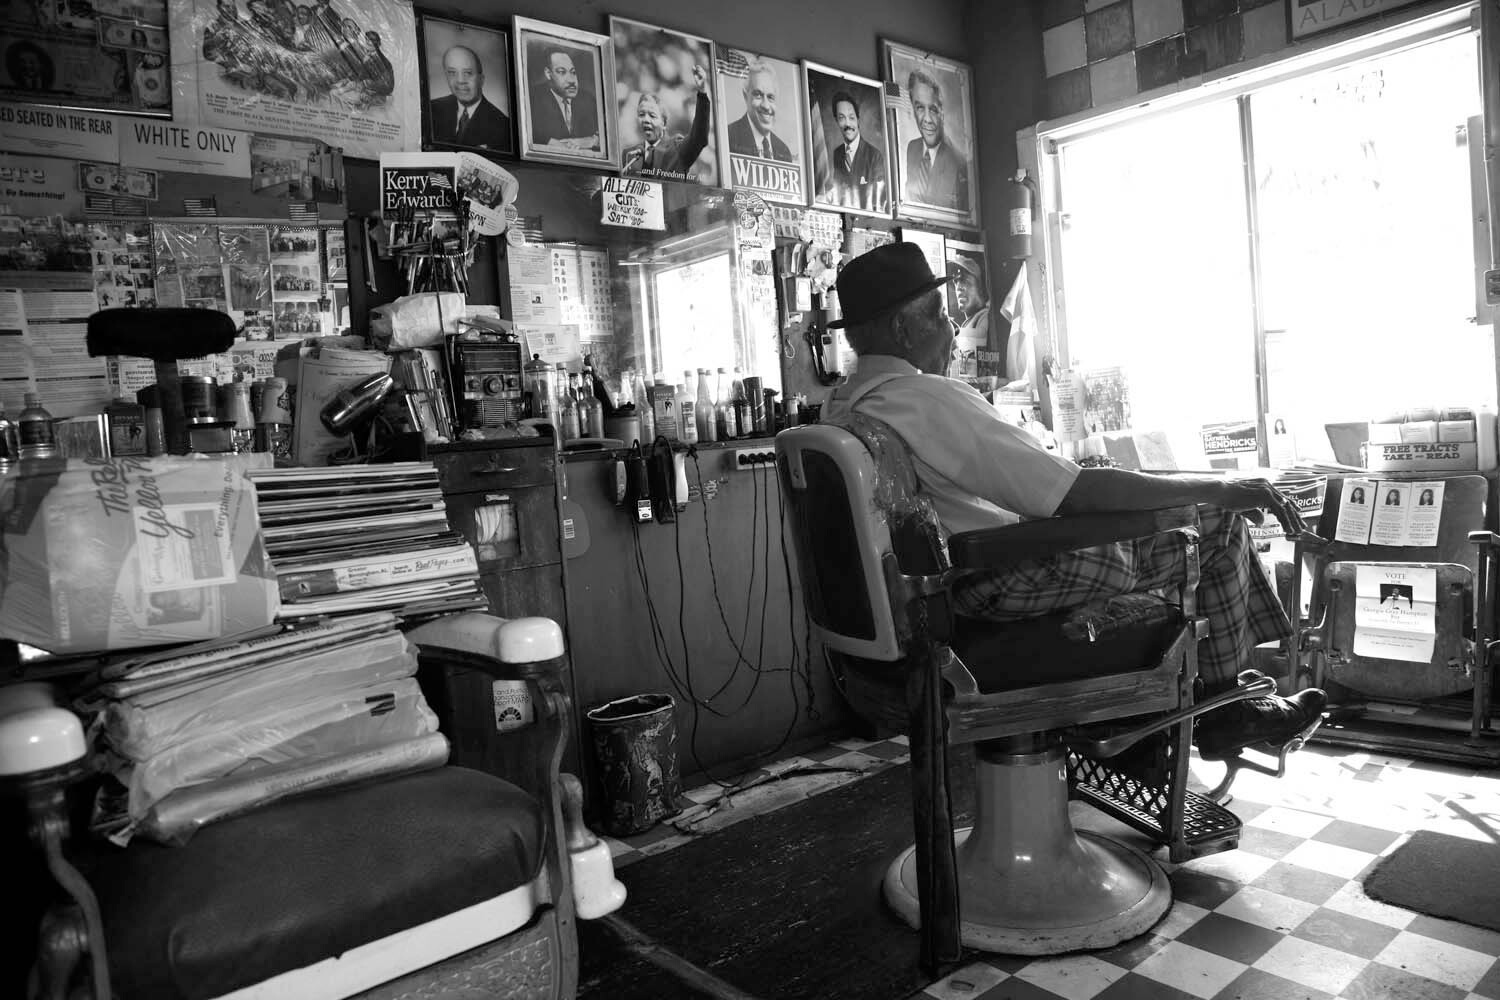 A still from The Barber of Birmingham. A man sits in a barbers chair, turned away from the camera. The wall behind him is covered in headshots, and various ephemera are stacked on the surfaces around him. Photo in black and white.